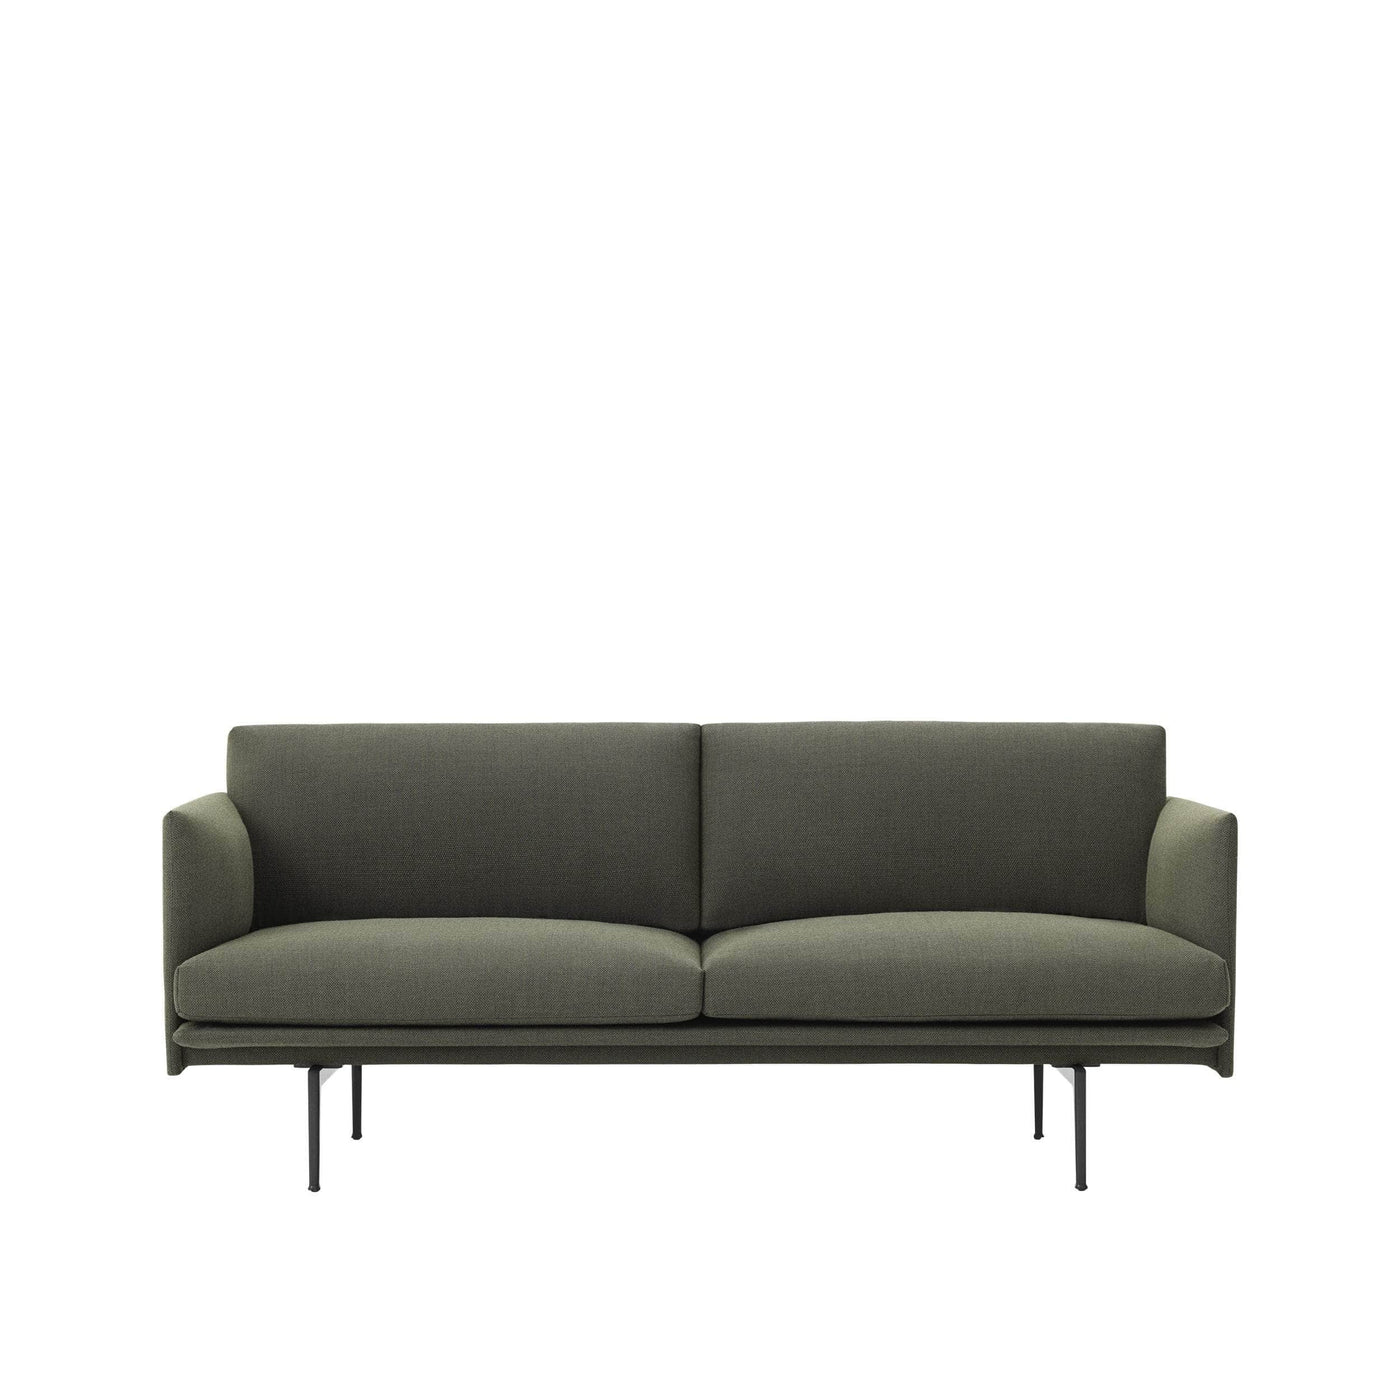 Fiord 961 by Kvadrat. Green upholstery fabric made to order for Muuto Rest, Connect & Outline sofas. Order free fabric swatches at someday designs. 